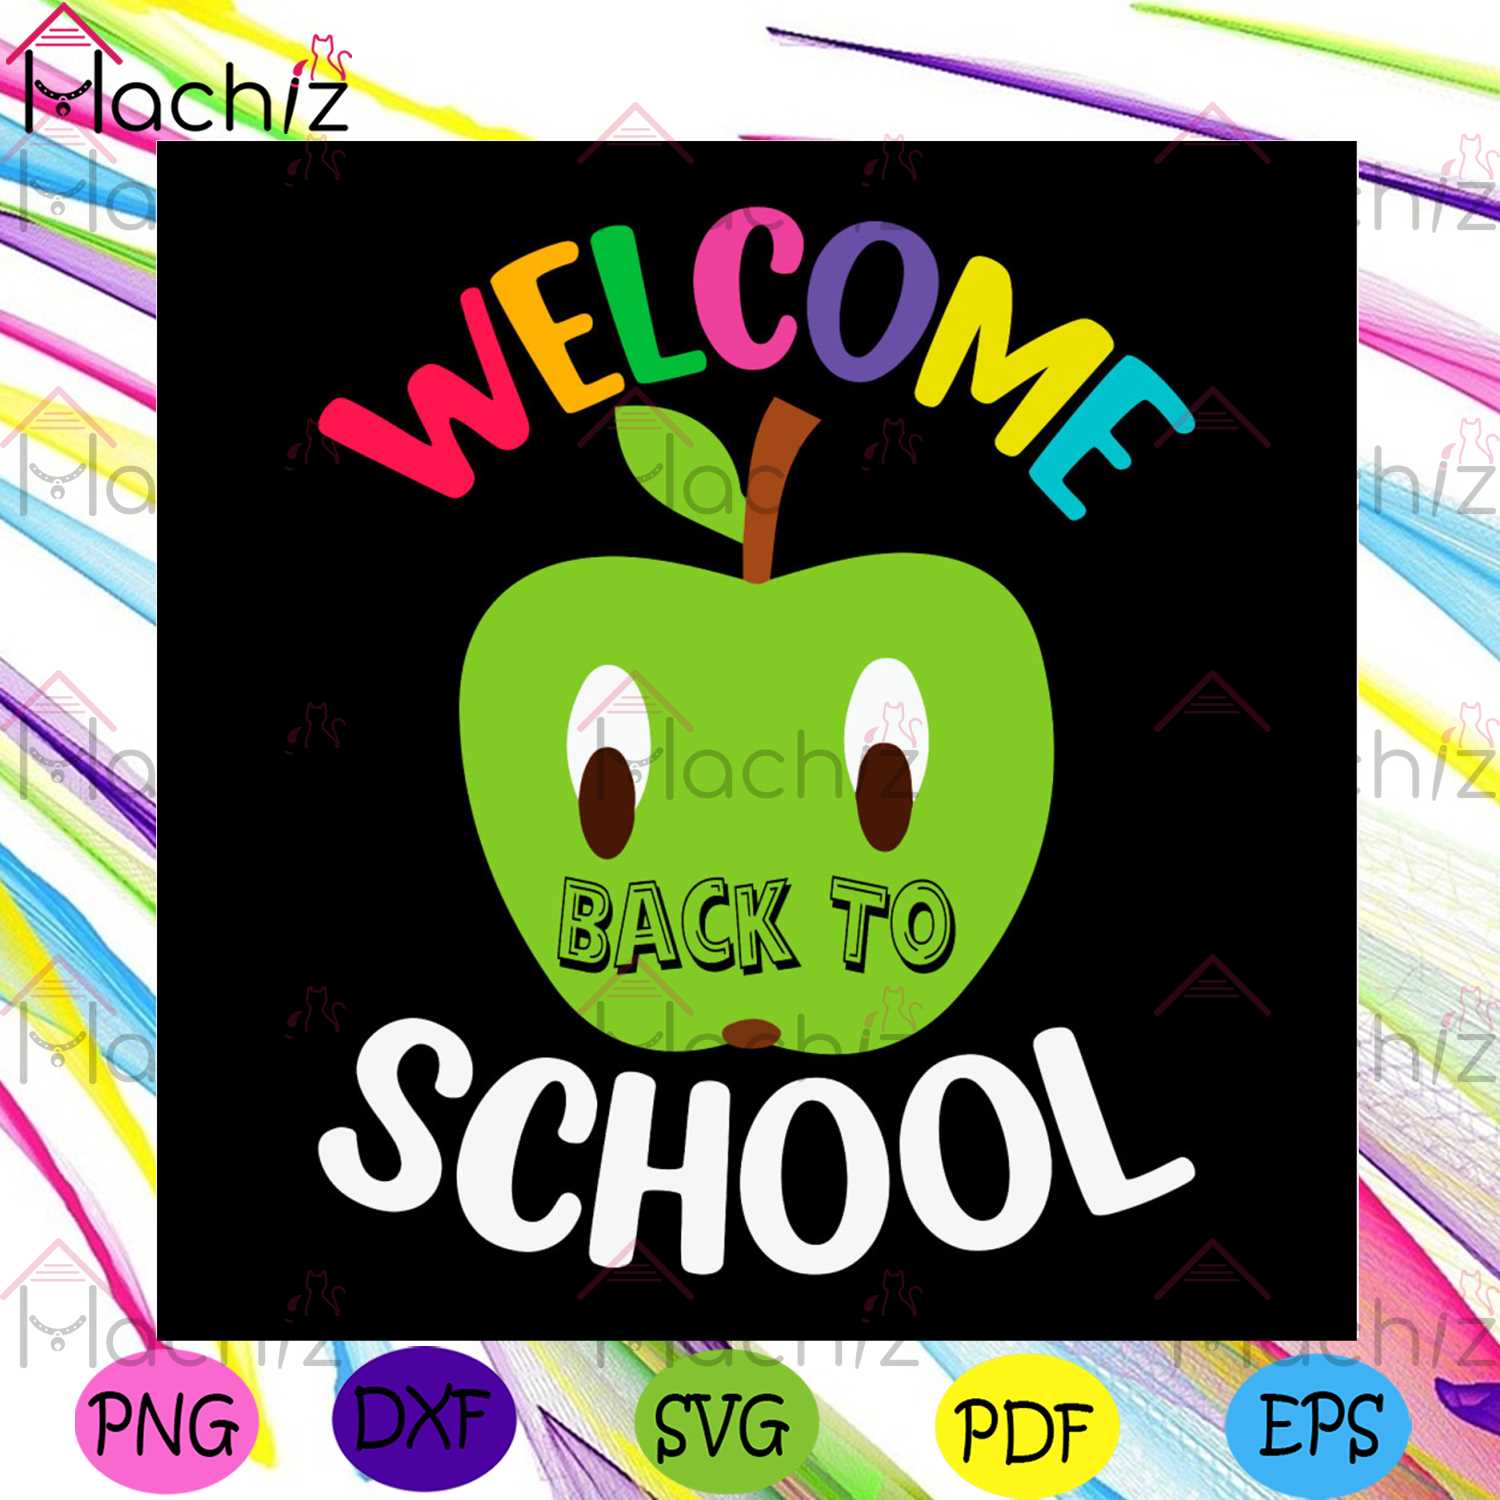 welcome-back-to-school-green-apple-svg-png